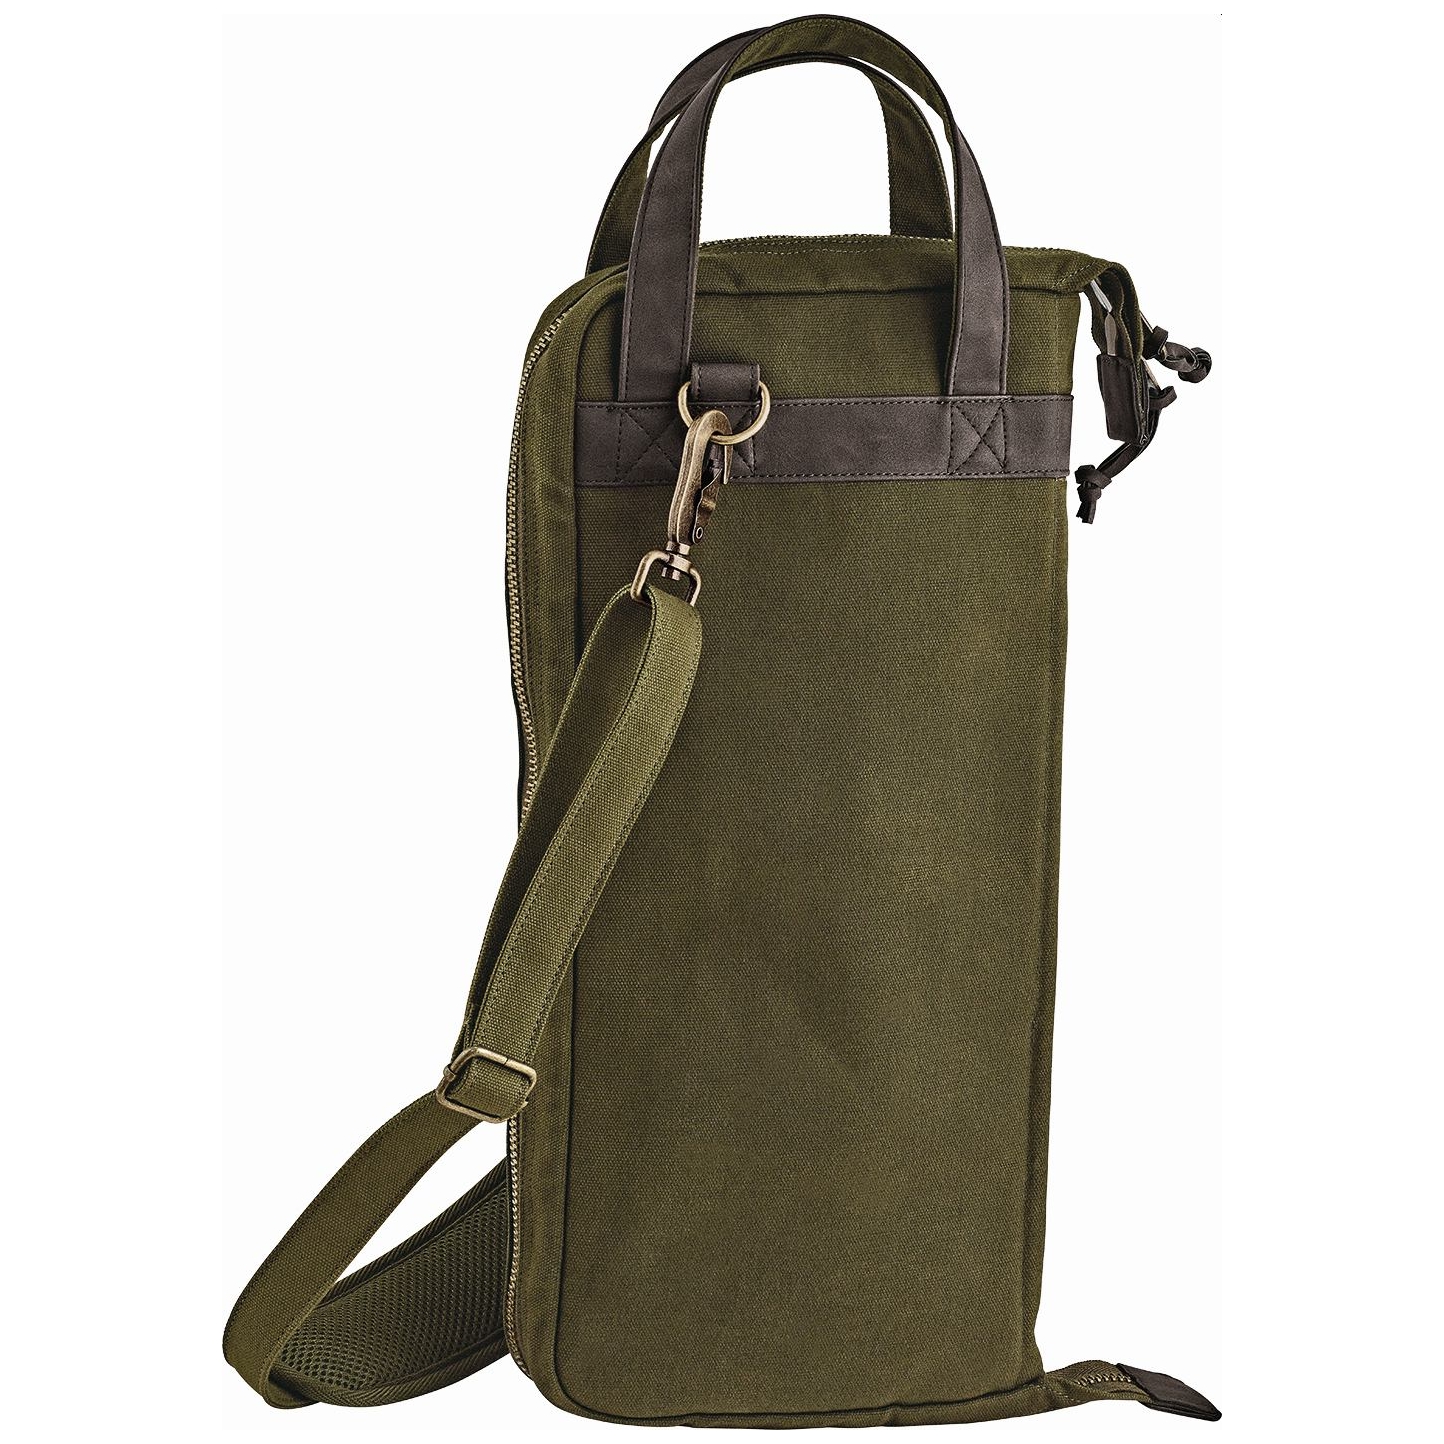 Meinl Cymbals MWSGR Canvas Collection Stick Bag, Forrest Green